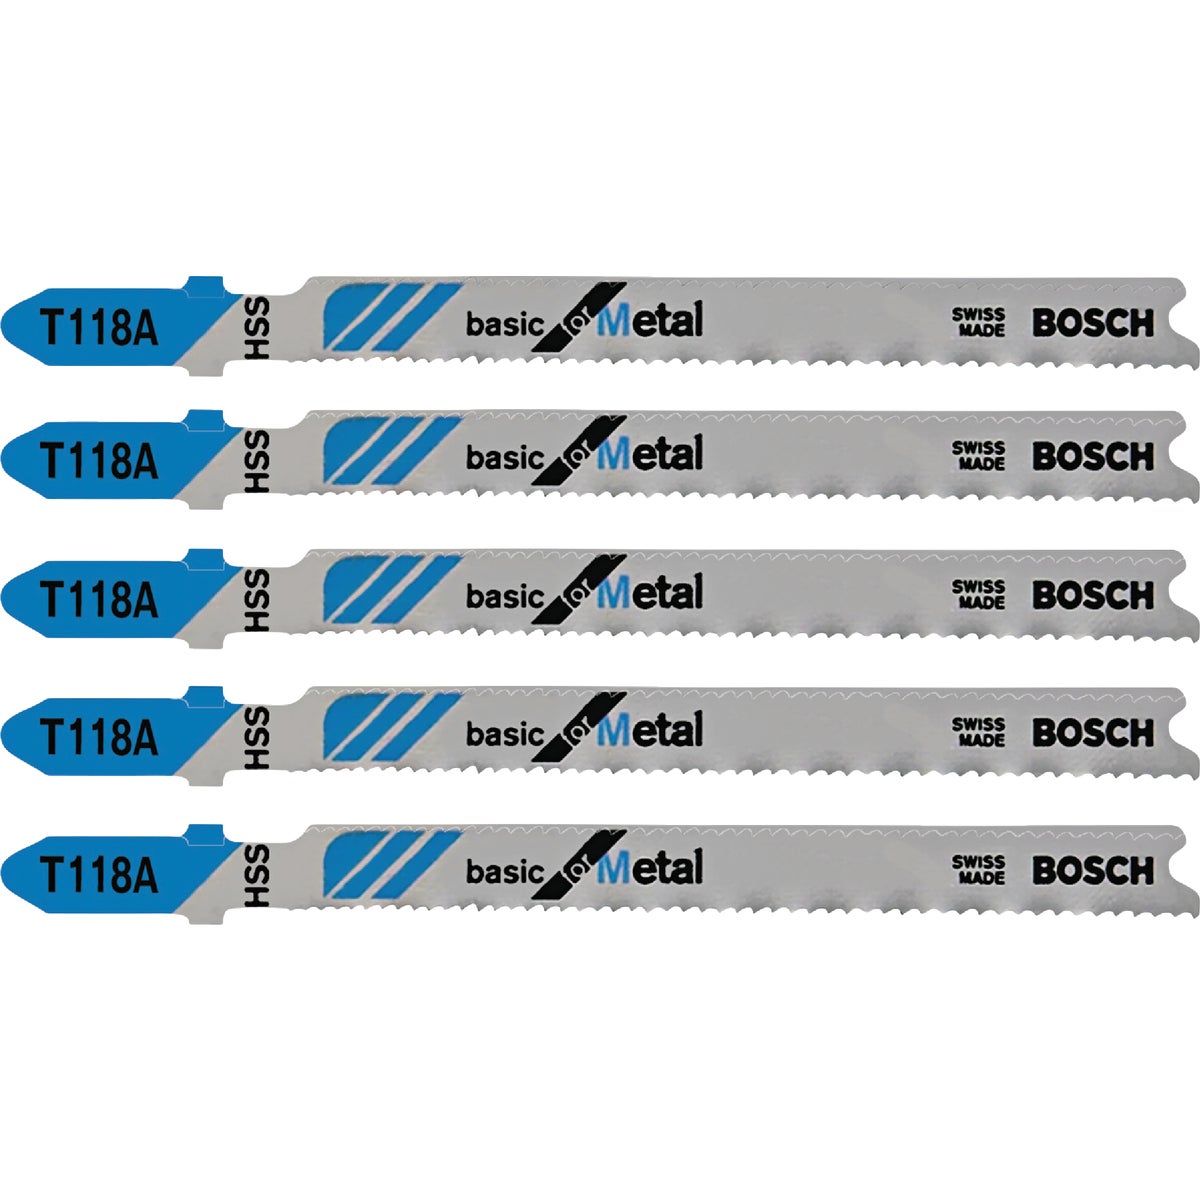 Bosch T-Shank 3 In. x 24 TPI High Carbon Steel Jig Saw Blade, Basic for Metal (5-Pack)